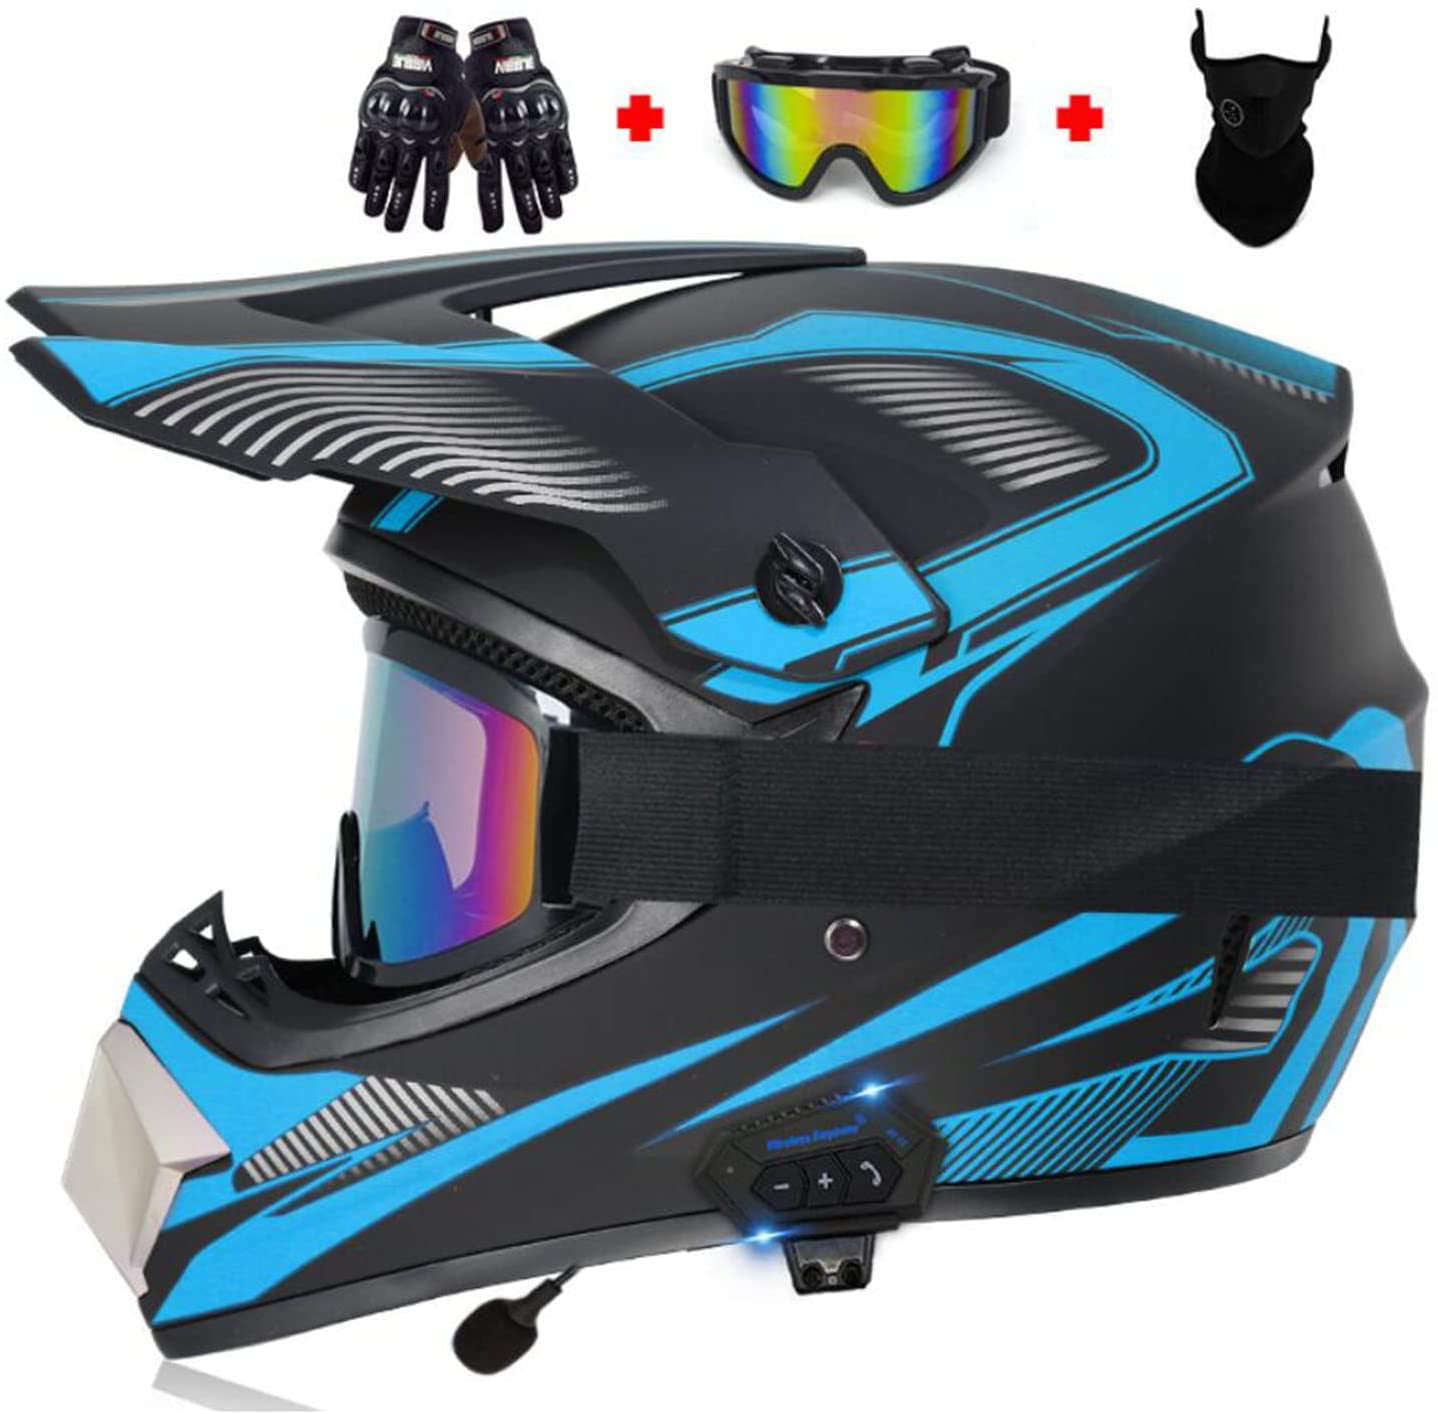 ATV MX Dirt Bike Off-Road Helmet DOT/ECE Approved with Goggle Mask and Gloves